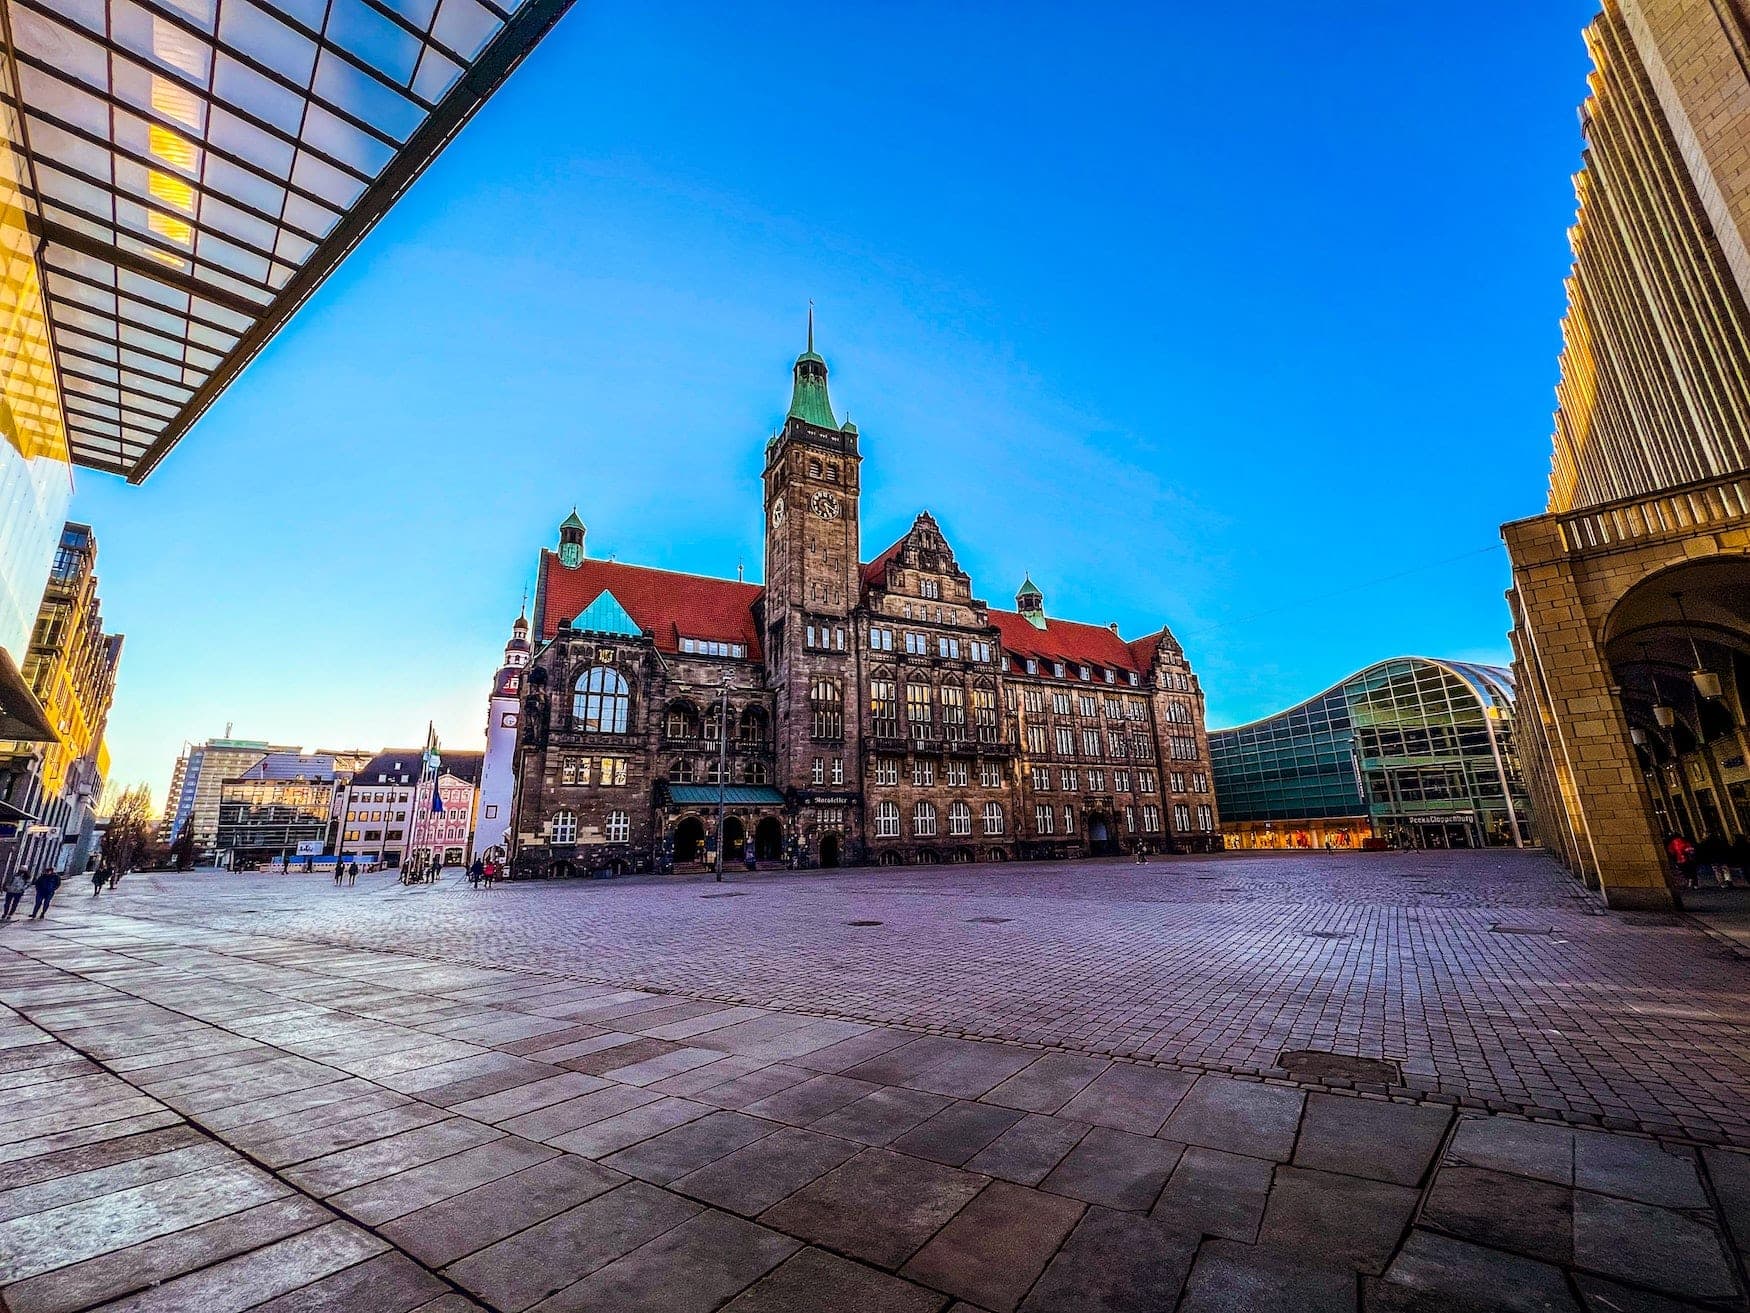 Market Square and Town Hall in Chemnitz